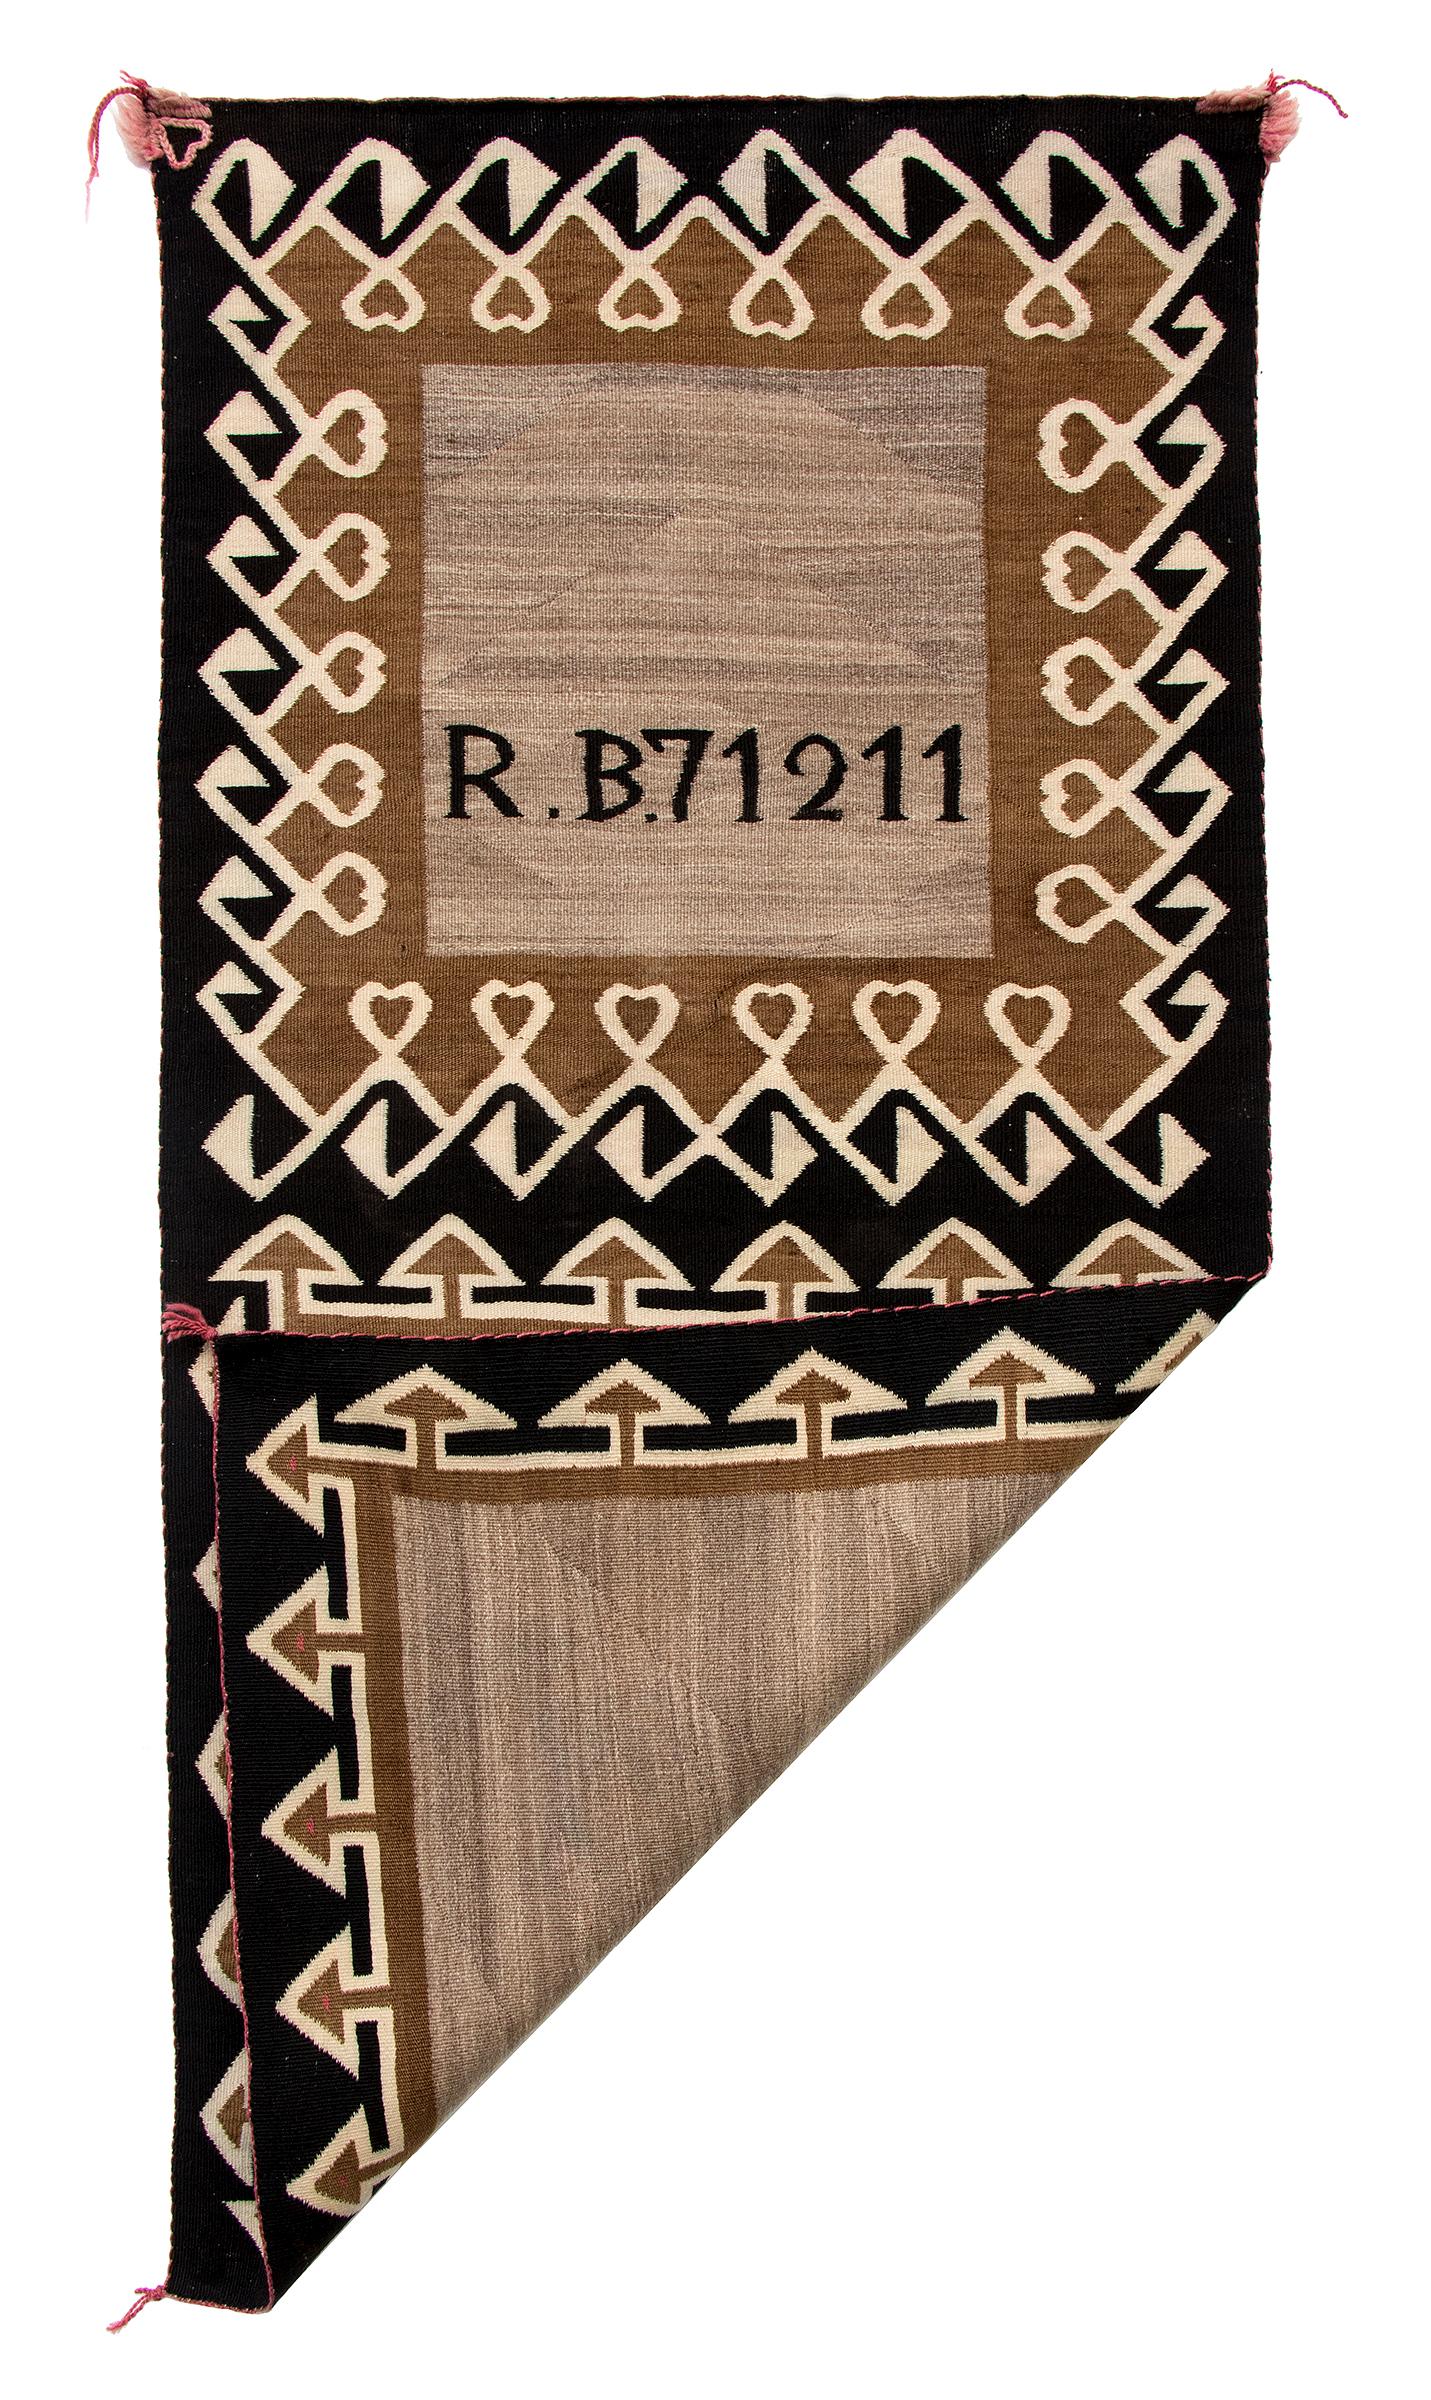 Navajo Double Saddle Blanket, circa 1900. R.B. 71211 woven on front top half. Weaving measures 47 x 23 ¼ inches.